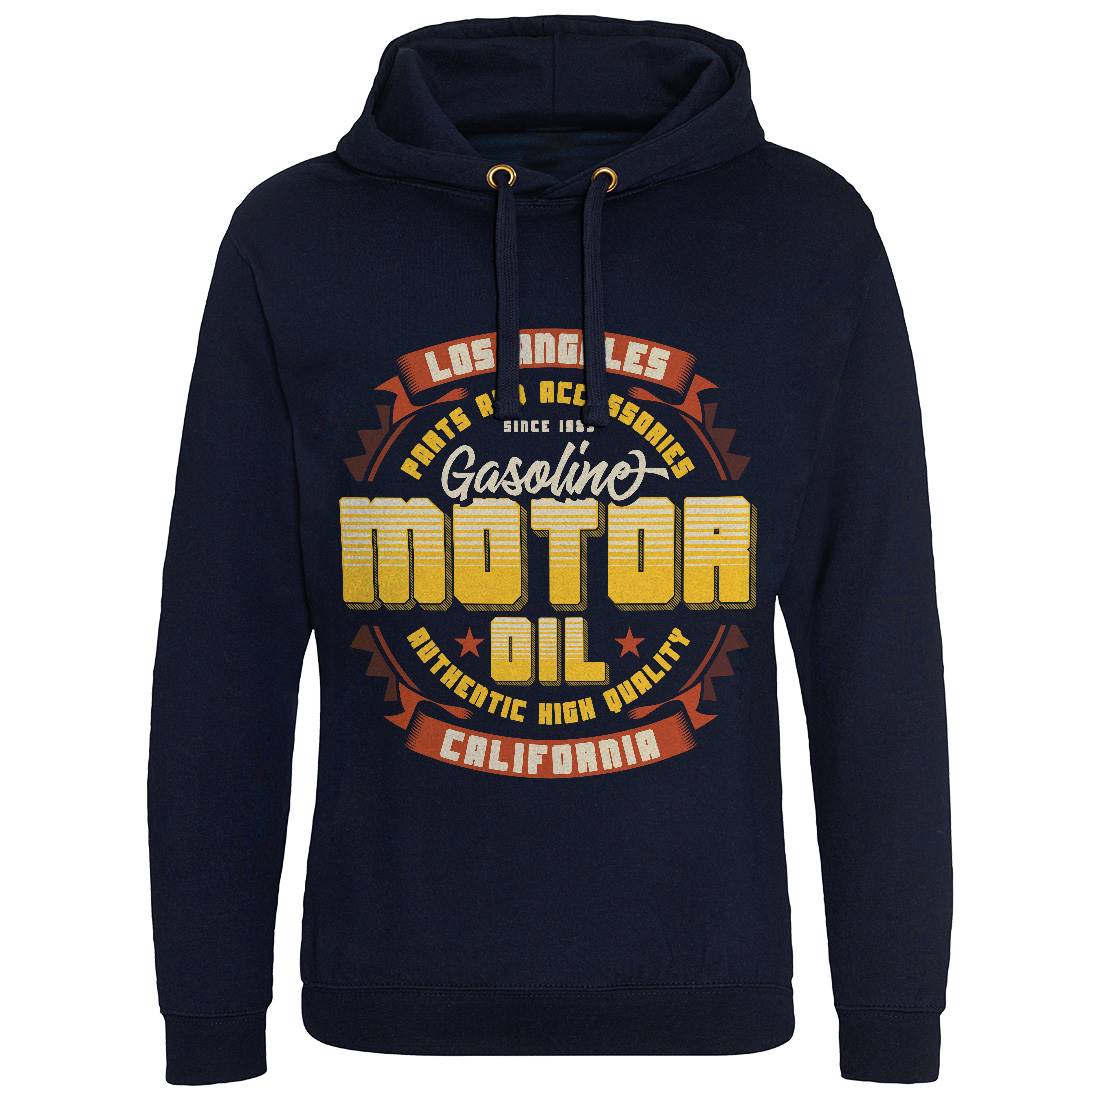 Motor Oil Mens Hoodie Without Pocket Motorcycles B312